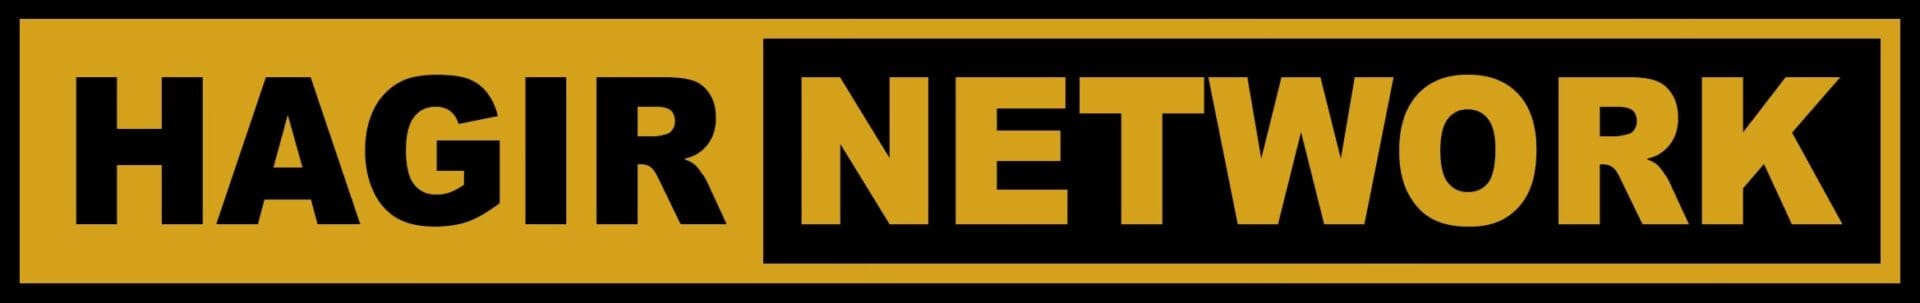 A black and yellow logo for the net.